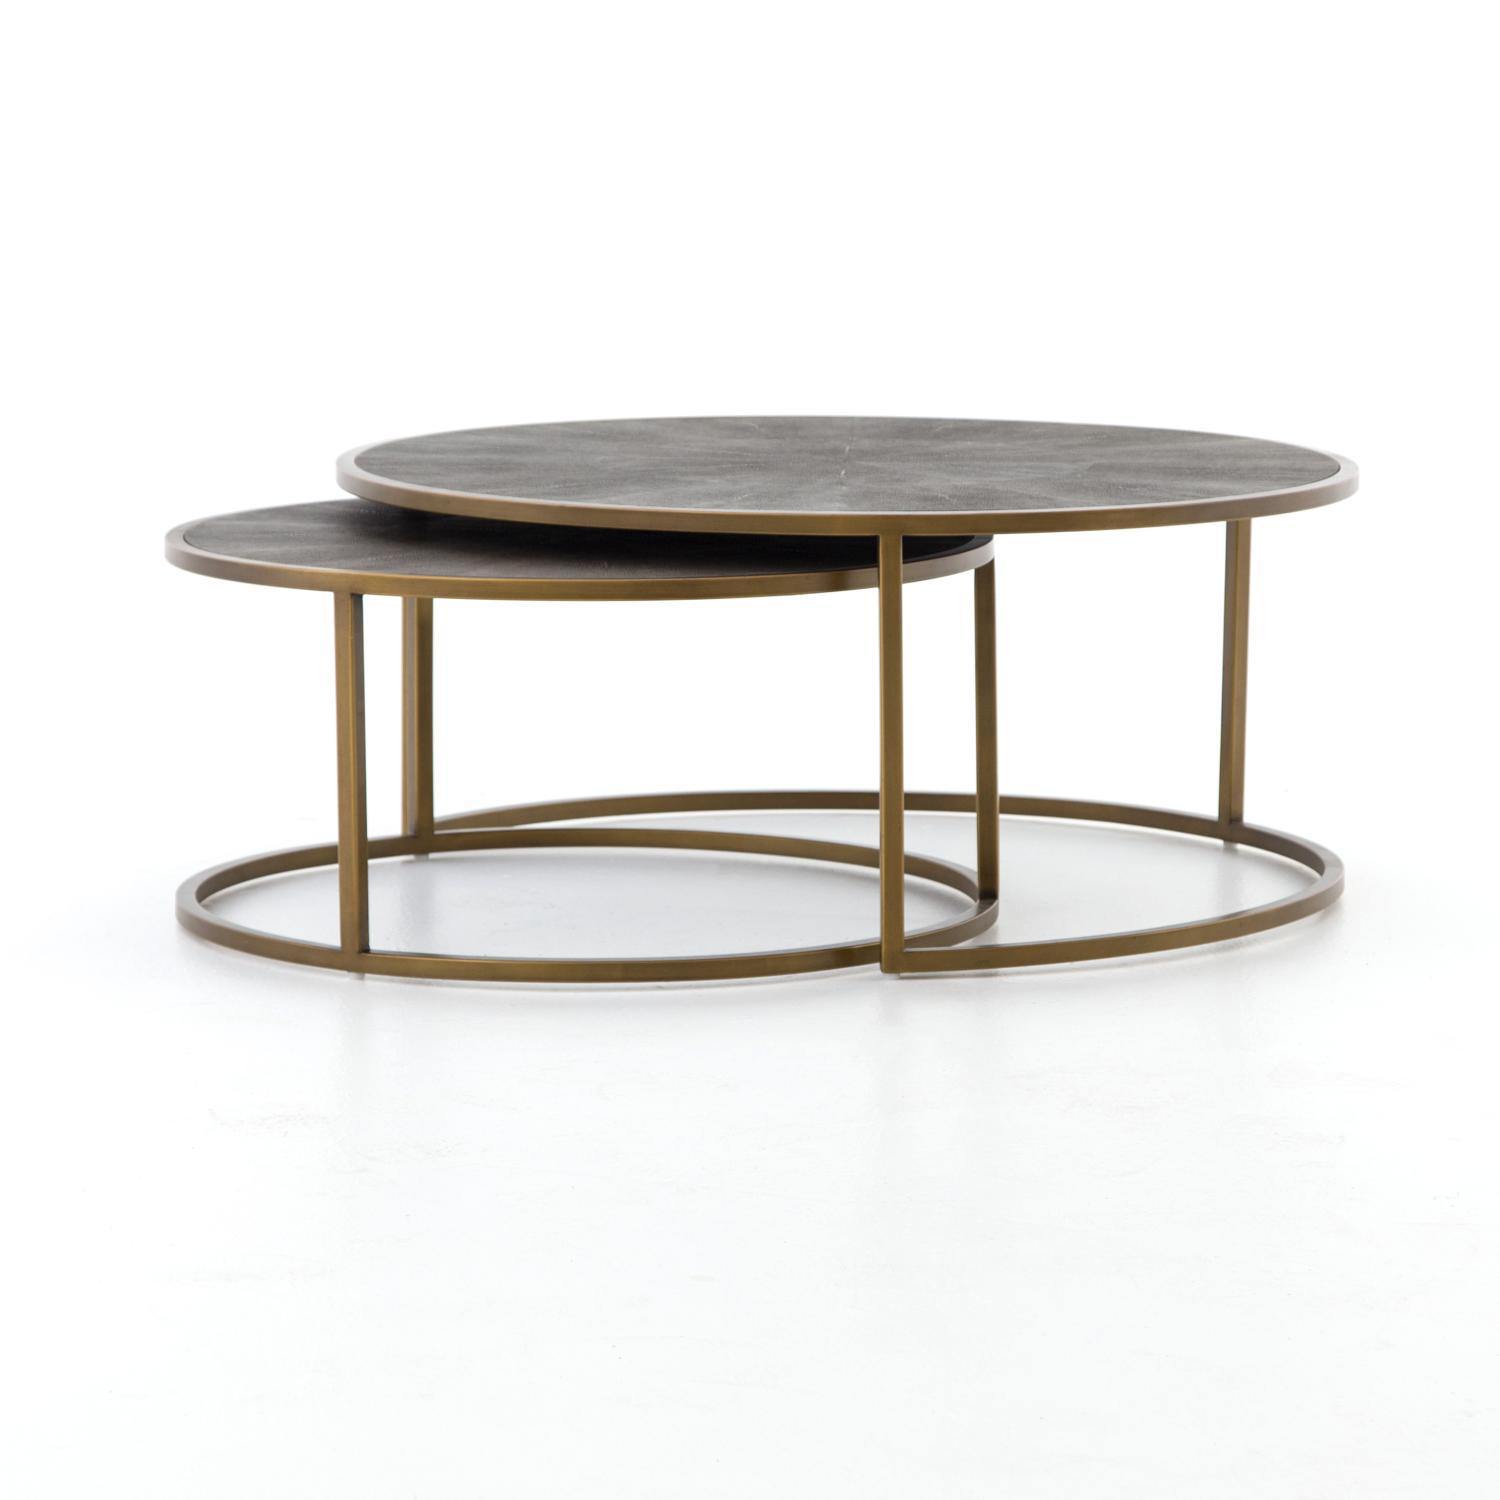 Four Hands FURNITURE - Shagreen Nesting Tables